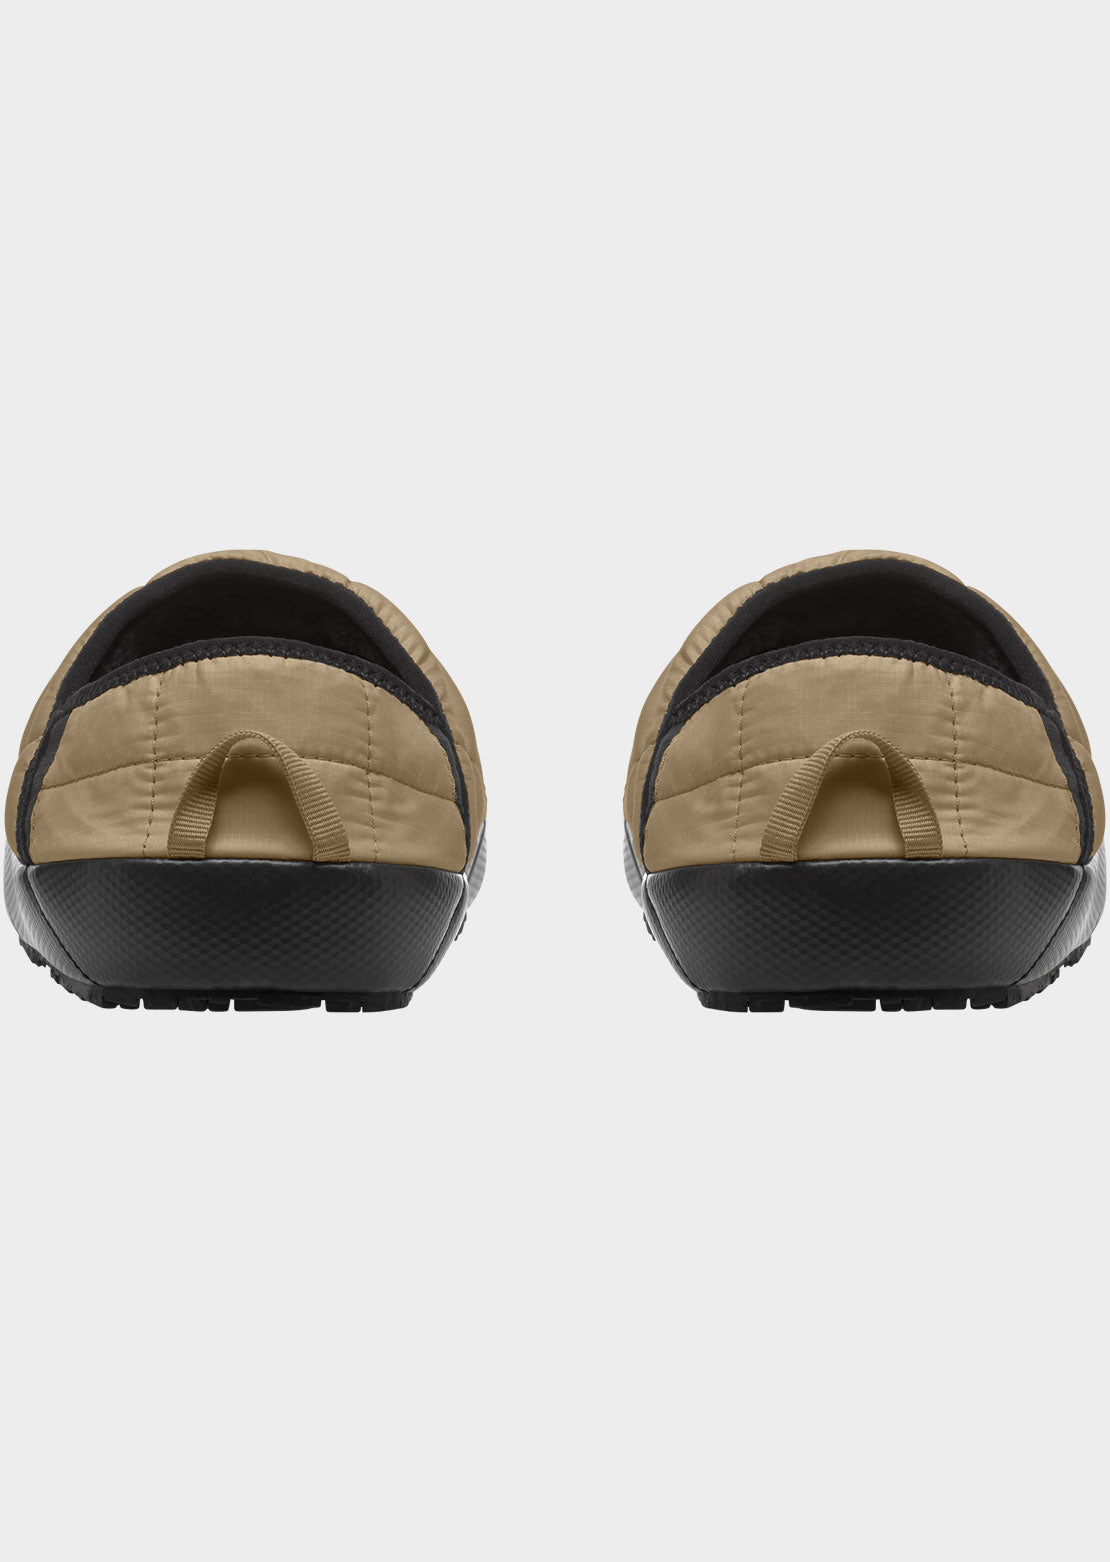 The North Face Men&#39;s ThermoBall Traction Mule V Slippers Hawthorne Khaki/TNF Black